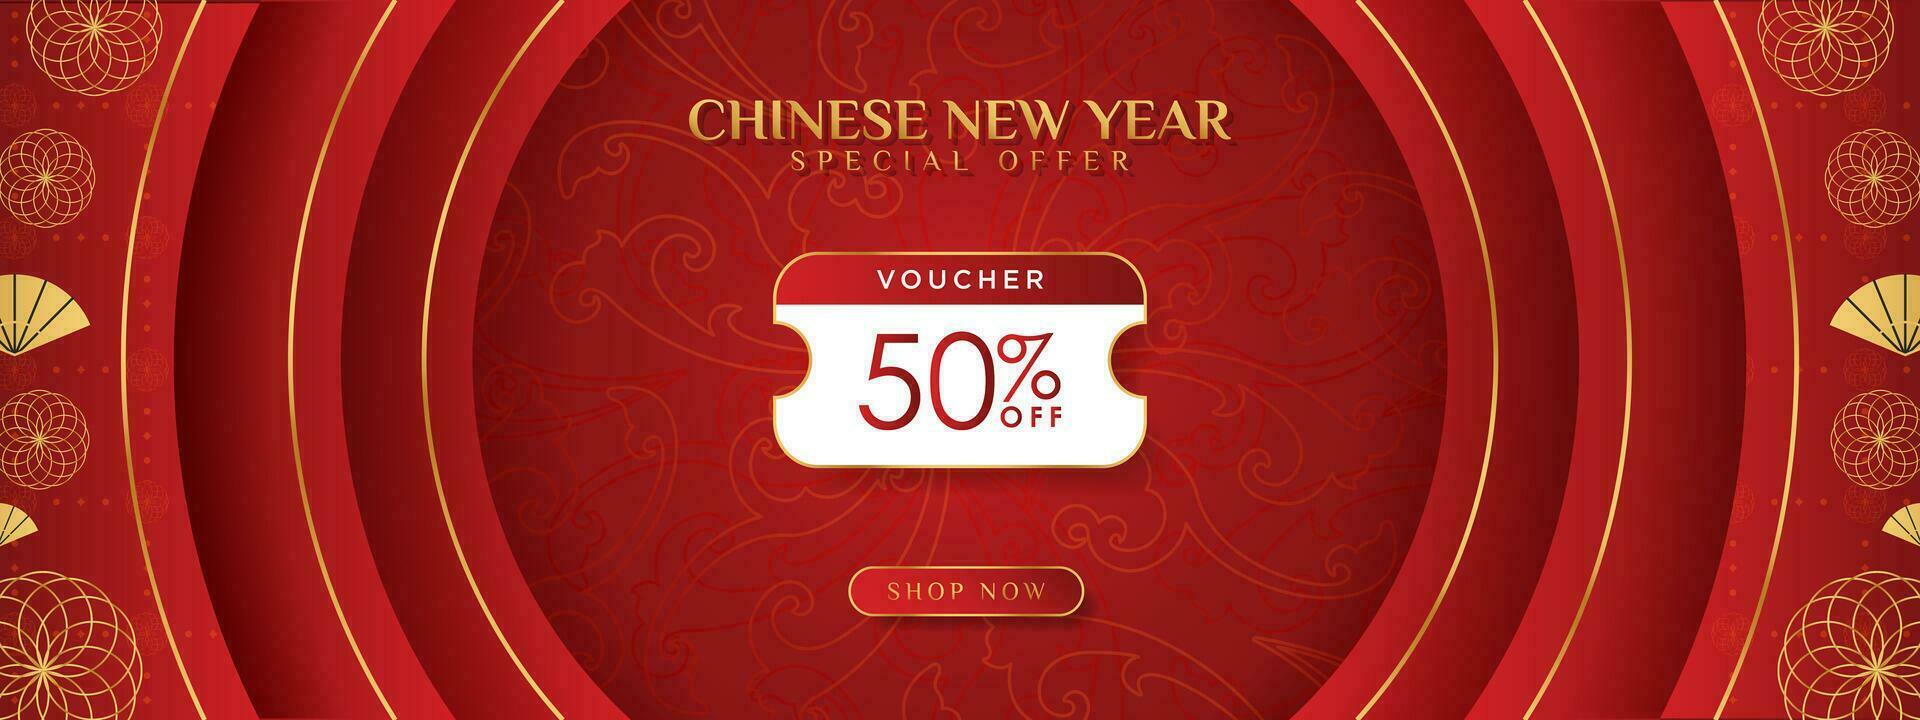 Chinese New Year 50 Discount Voucher Banner with oriental pattern design elements on red gradient background, shop now CTA button. Vector Illustration. EPS 10